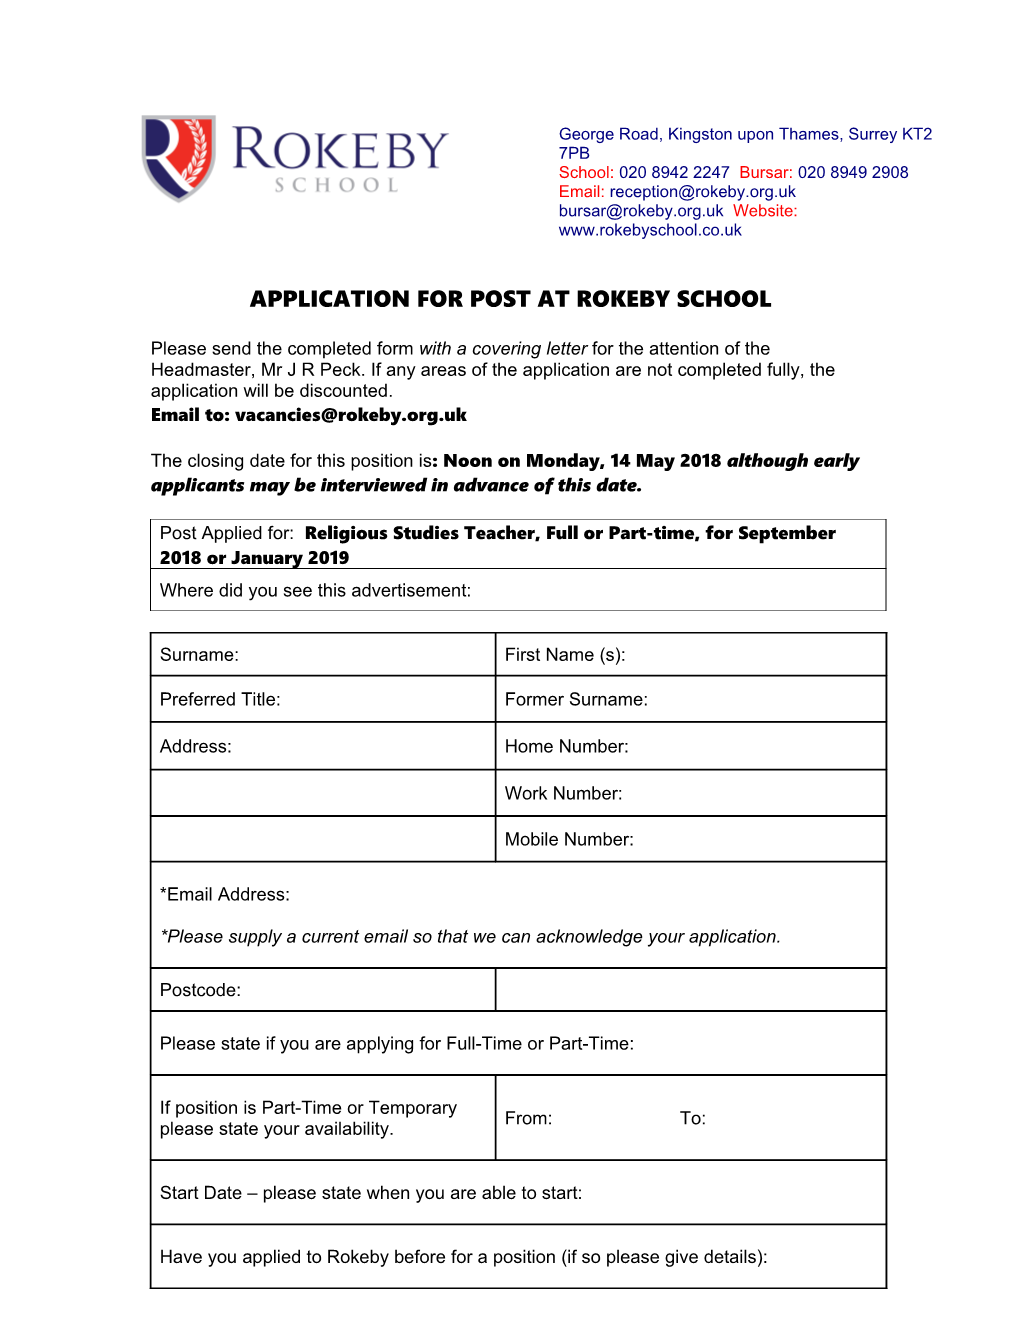 Application for Post at Rokeby School